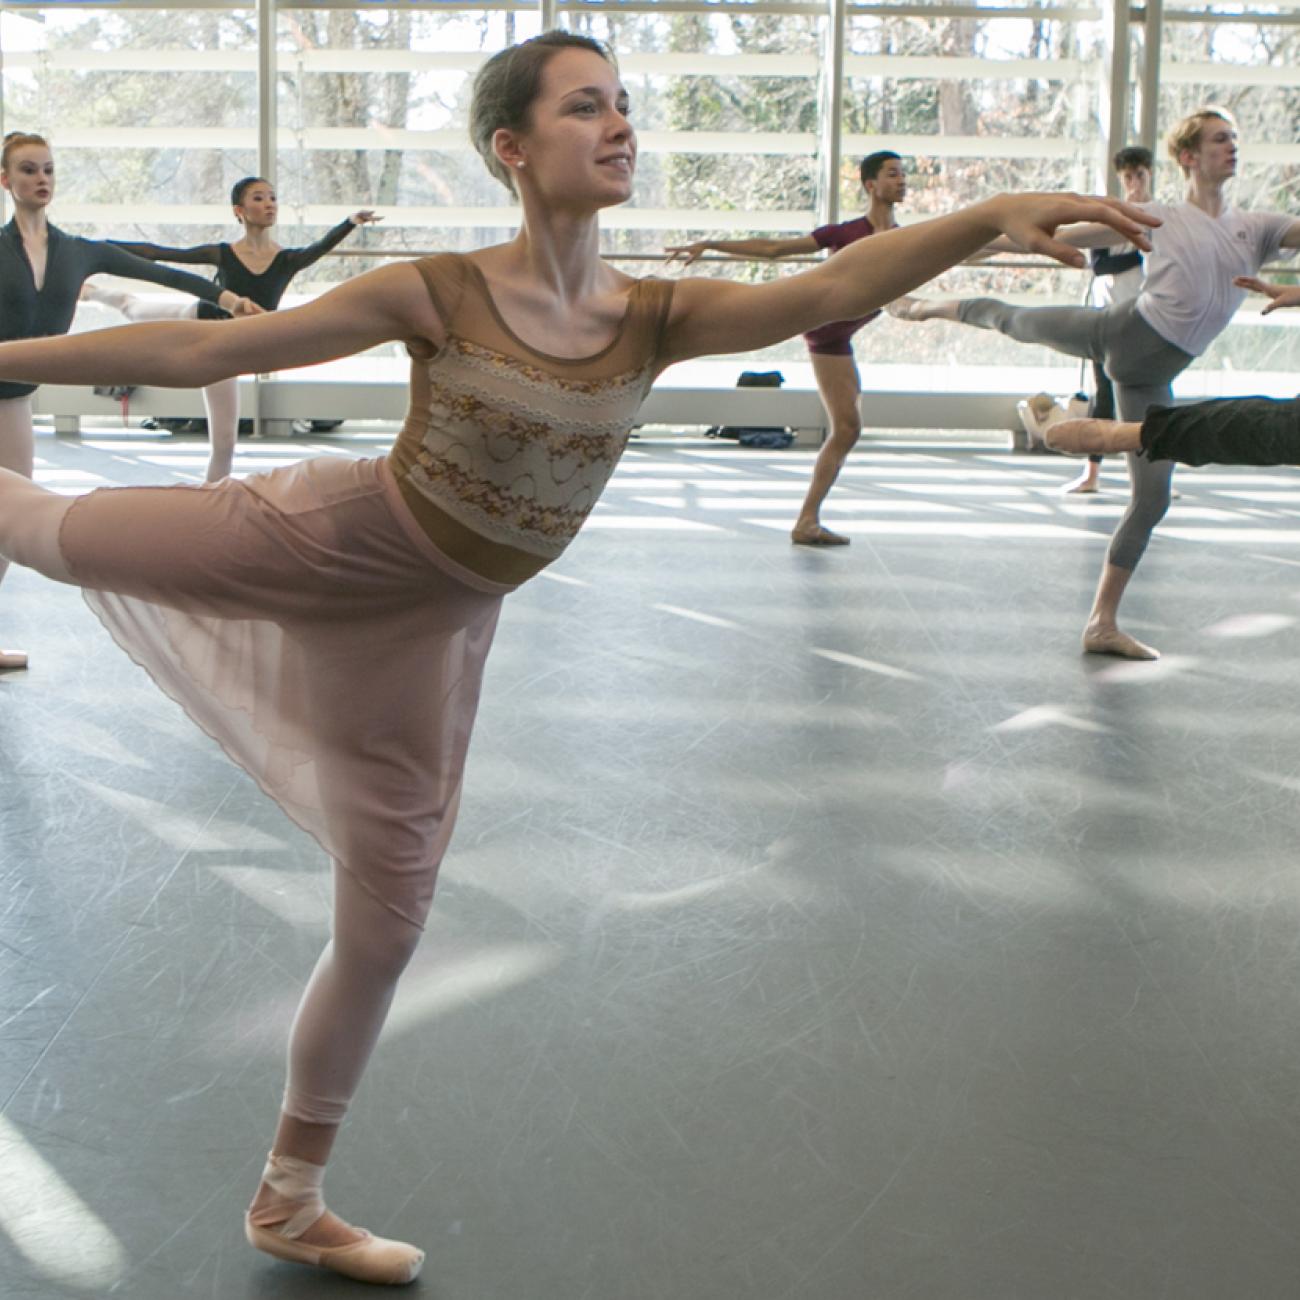 Let’s dance - American Ballet Theatre partnership energizes hundreds of students